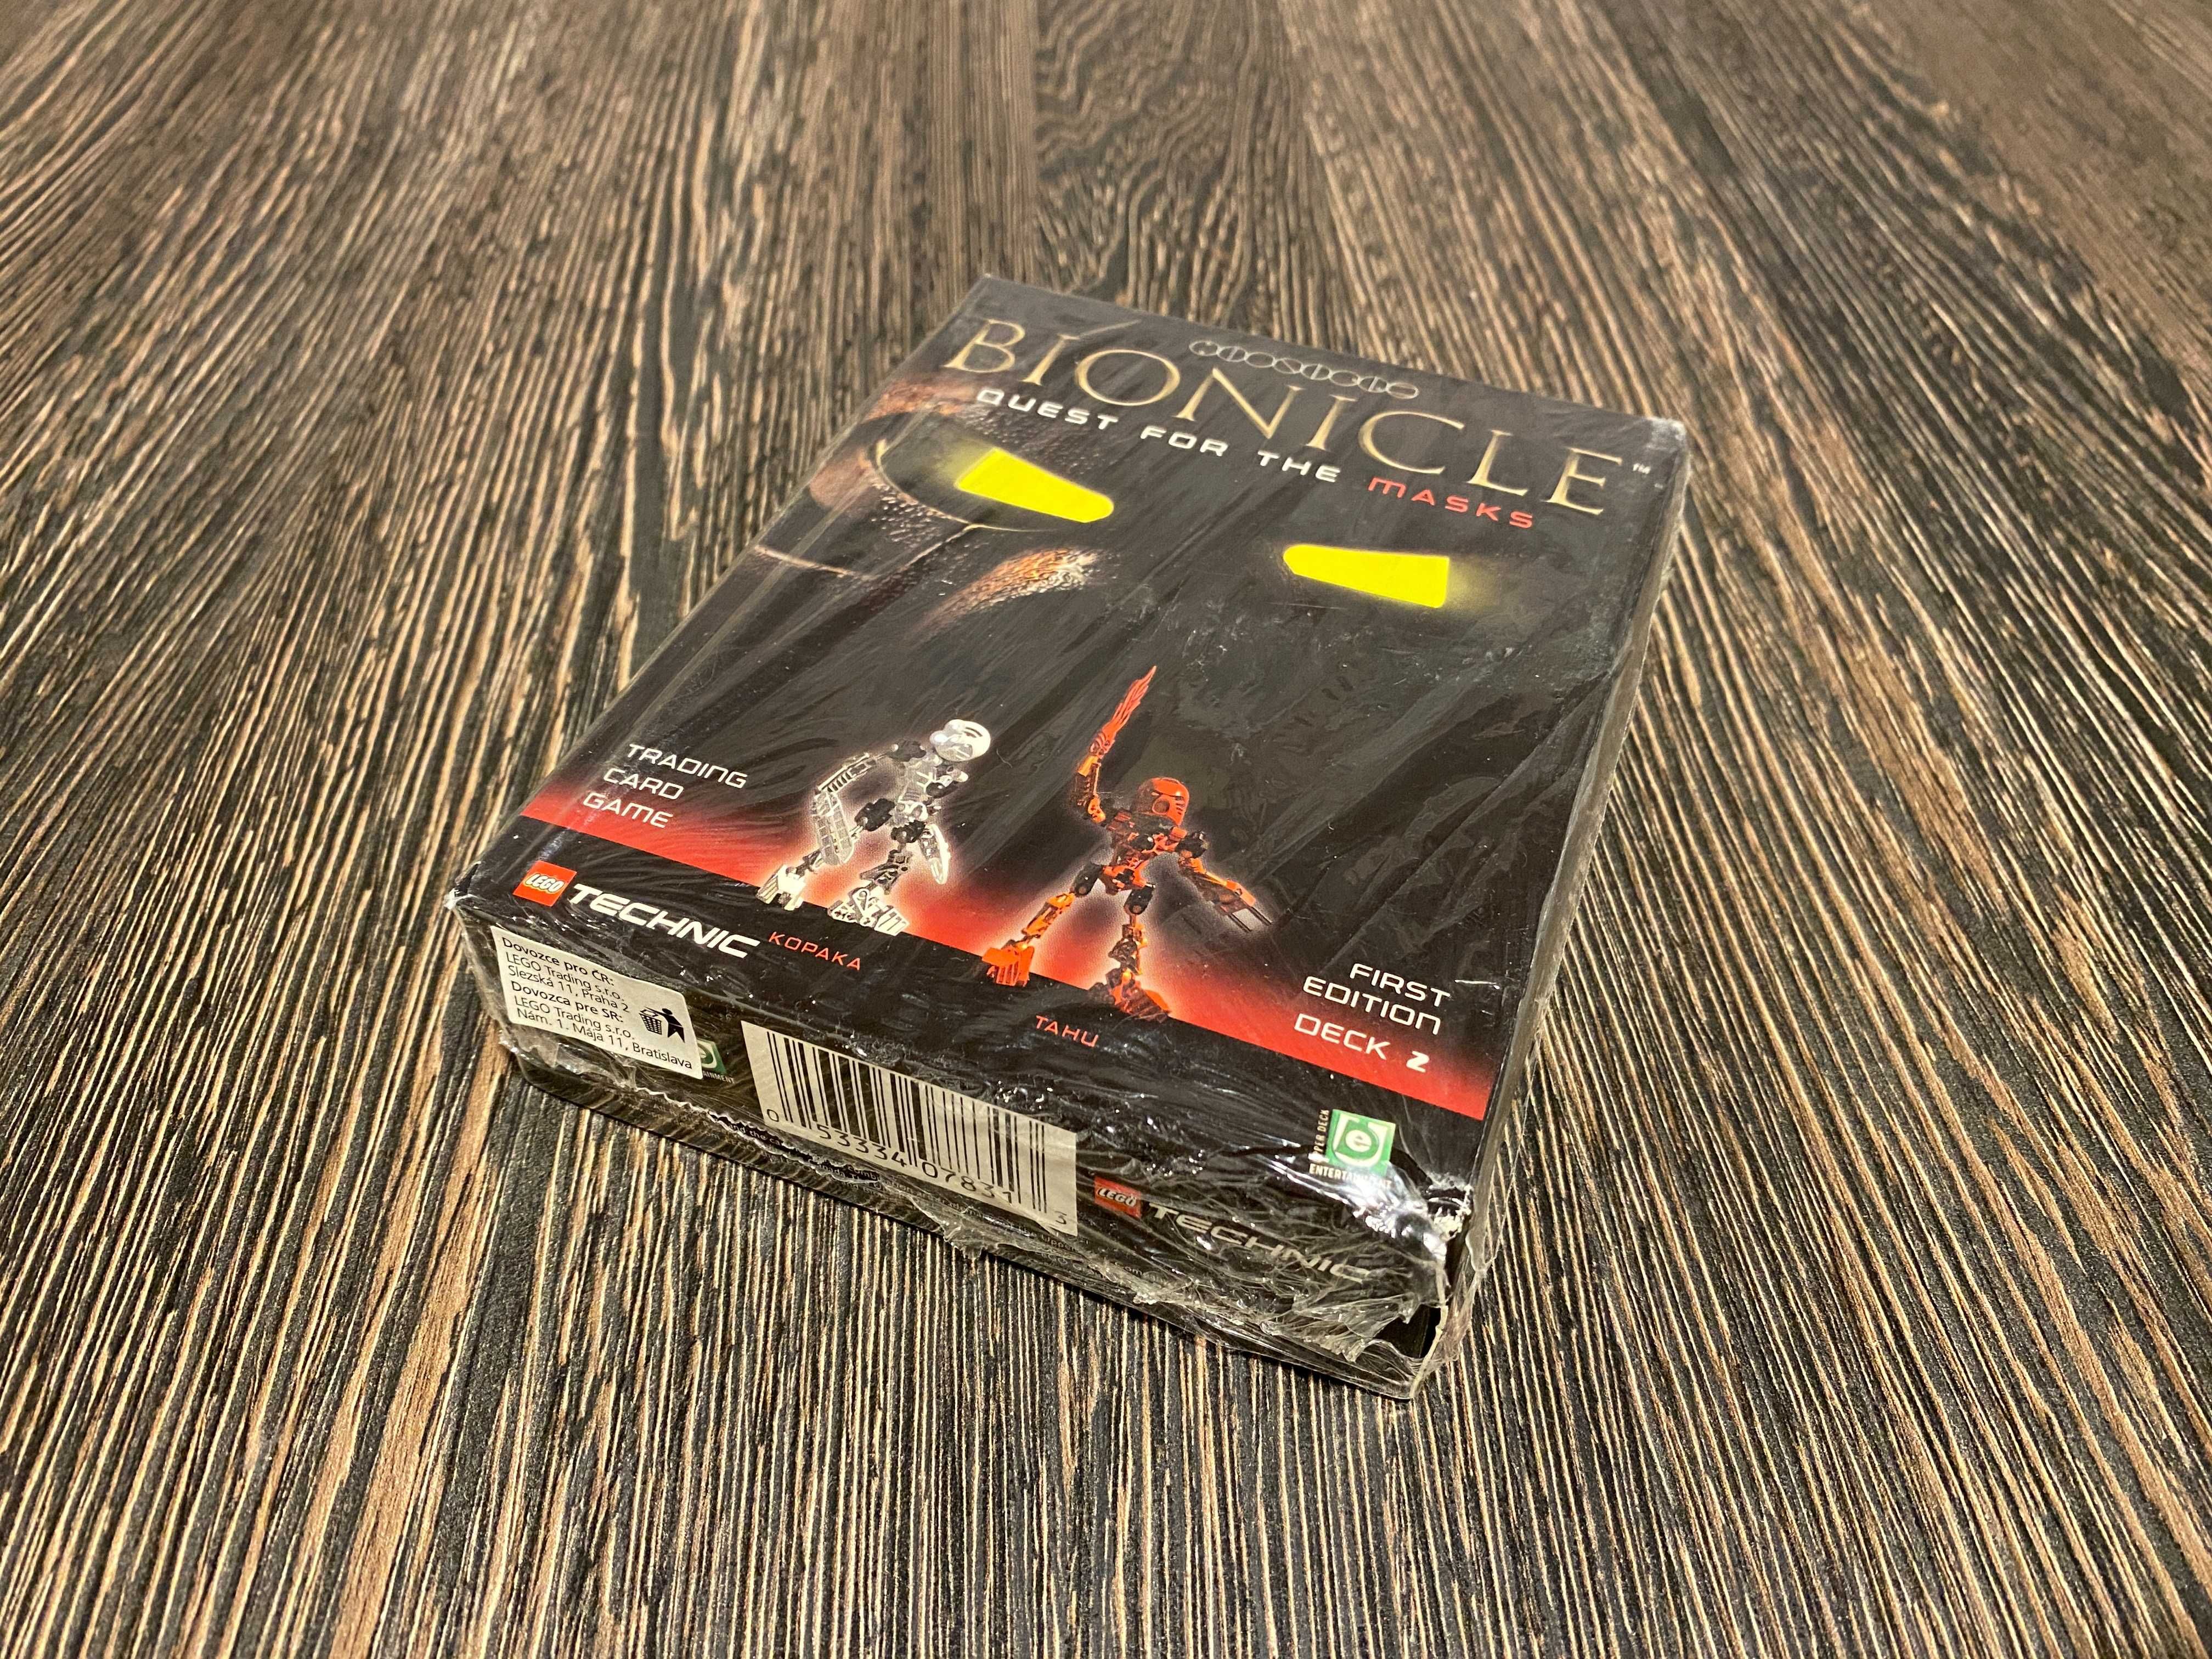 LEGO Bionicle Quest for the Masks Deck 2 gra nowa